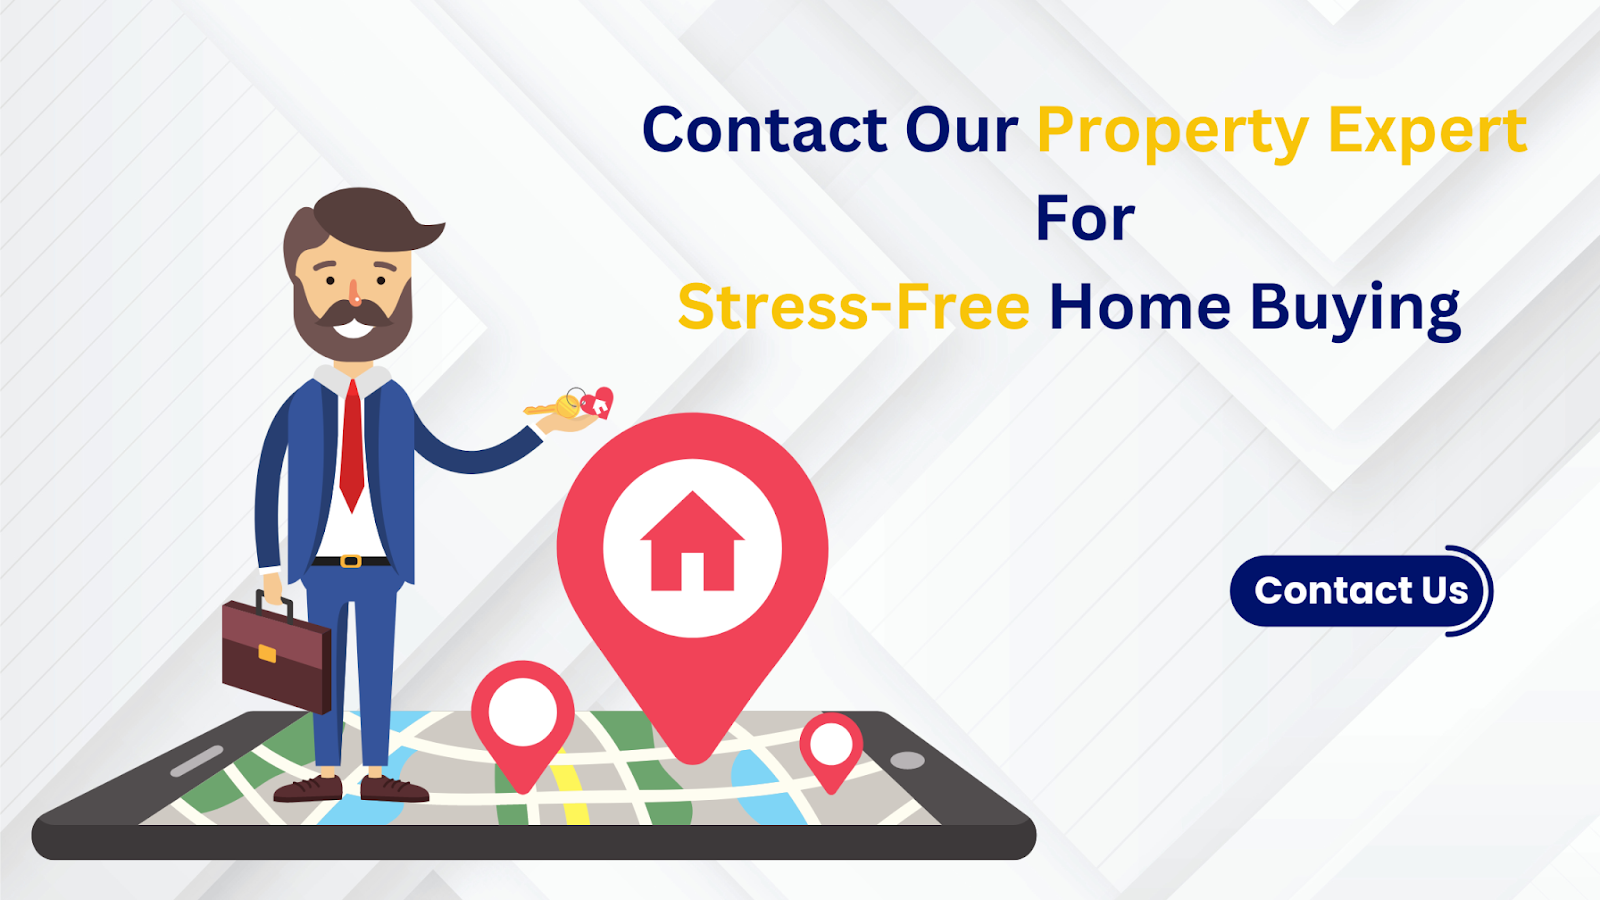 Assistance from the experts at PropertyCloud can make the home-buying process in winter feel warm and comforting.